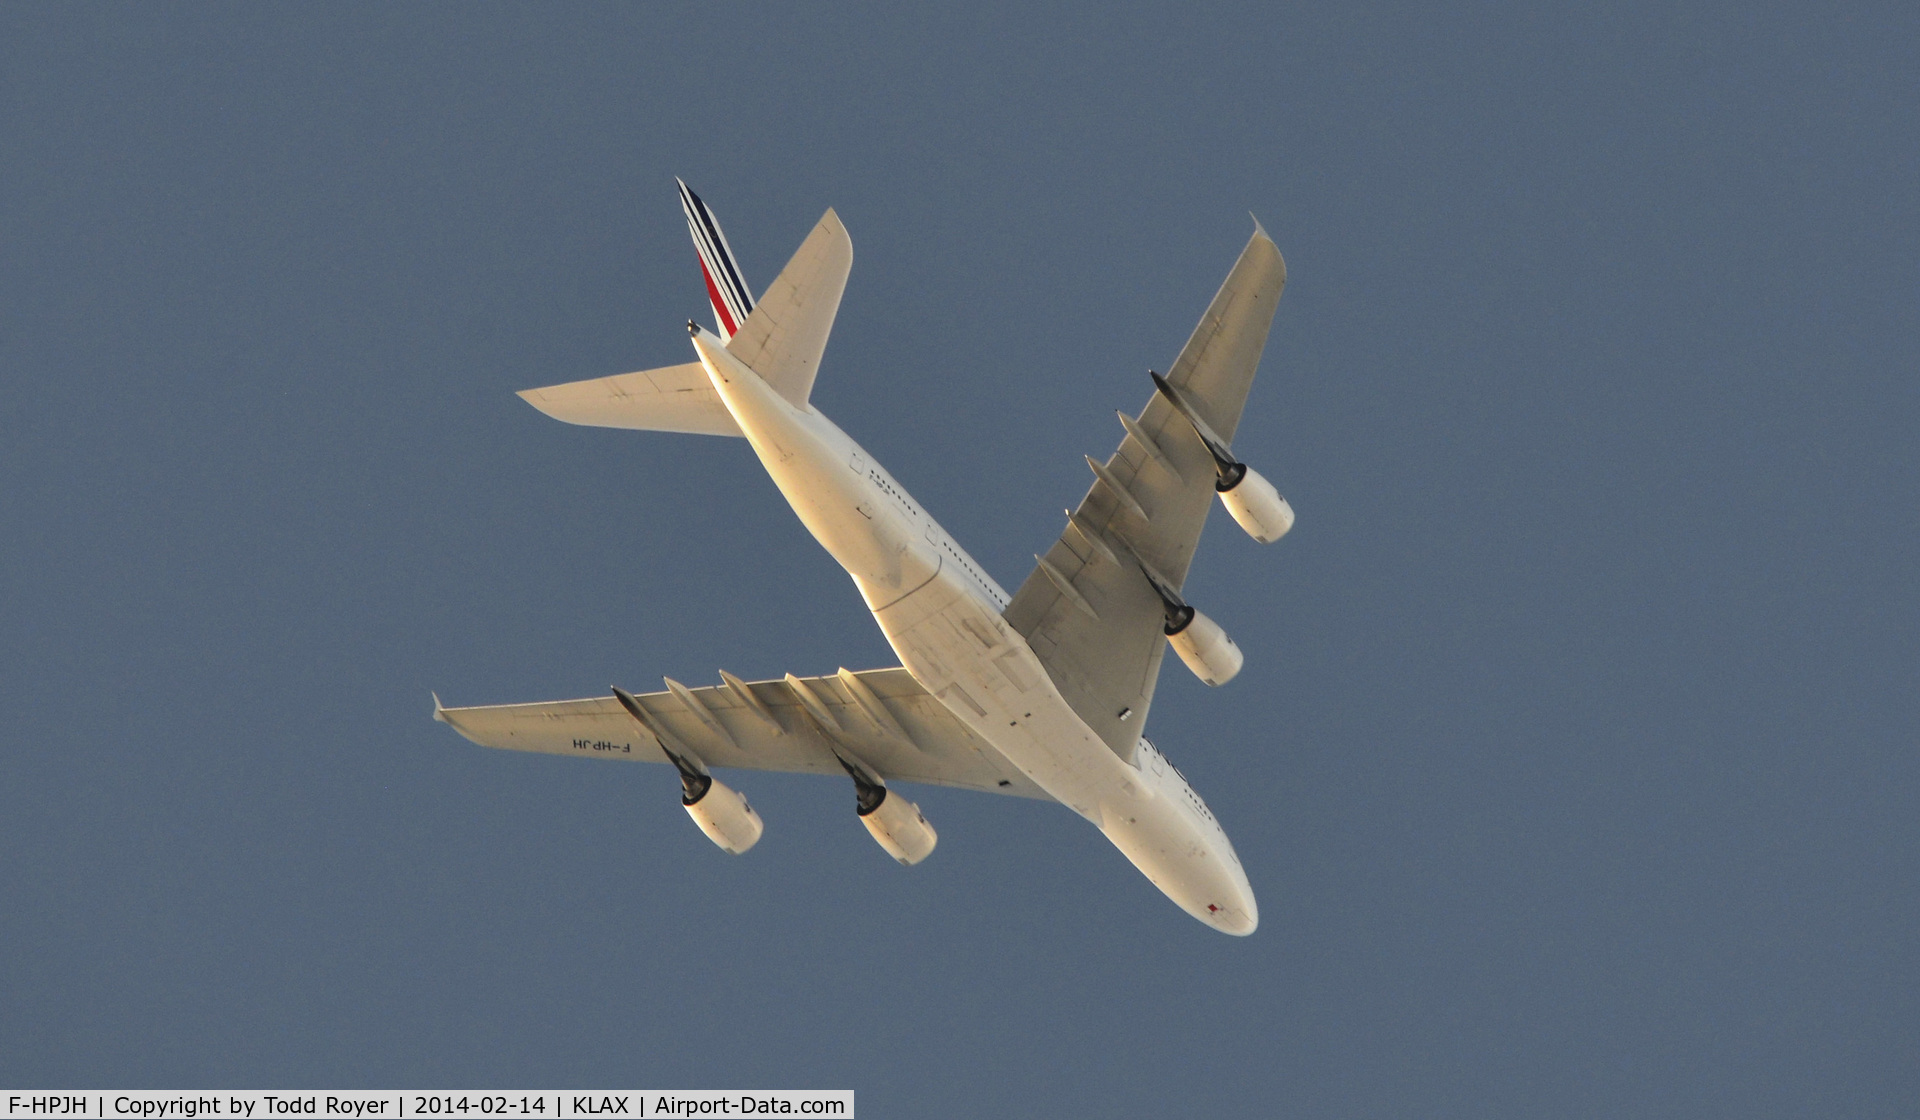 F-HPJH, 2011 Airbus A380-861 C/N 099, Crossing over LAX after departure